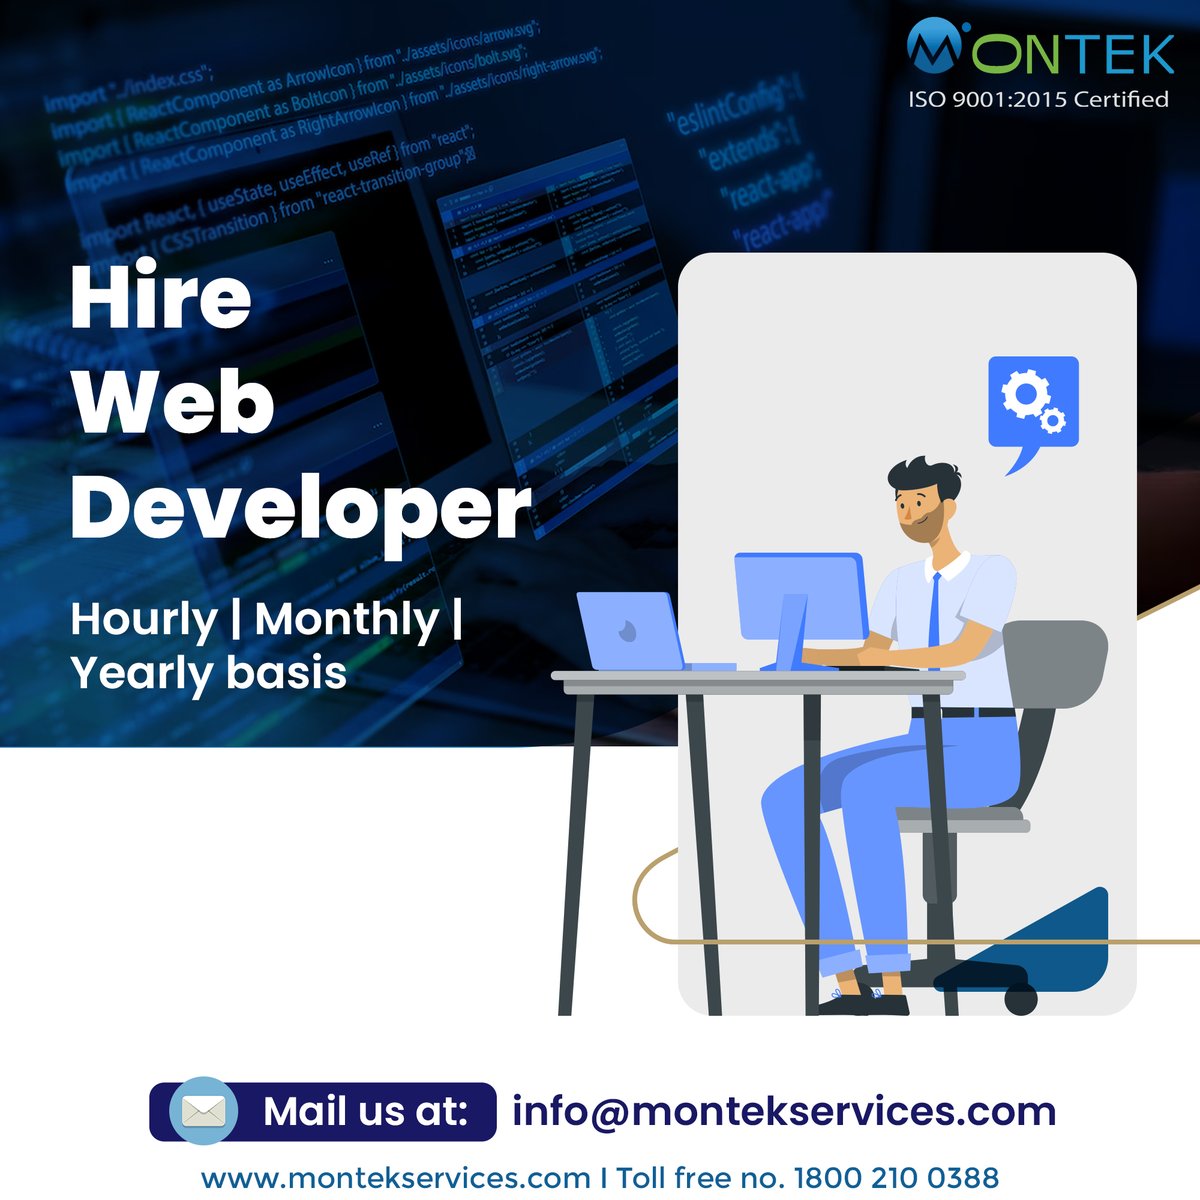 We provide tailored hiring solutions to match your requirements, be it on an hourly, monthly, or yearly basis.

Our pool of talent is proficient in a range of areas including:
PHP development 
CodeIgniter expertise
Laravel proficiency
Wordpress

#montekservices #webdeveloper